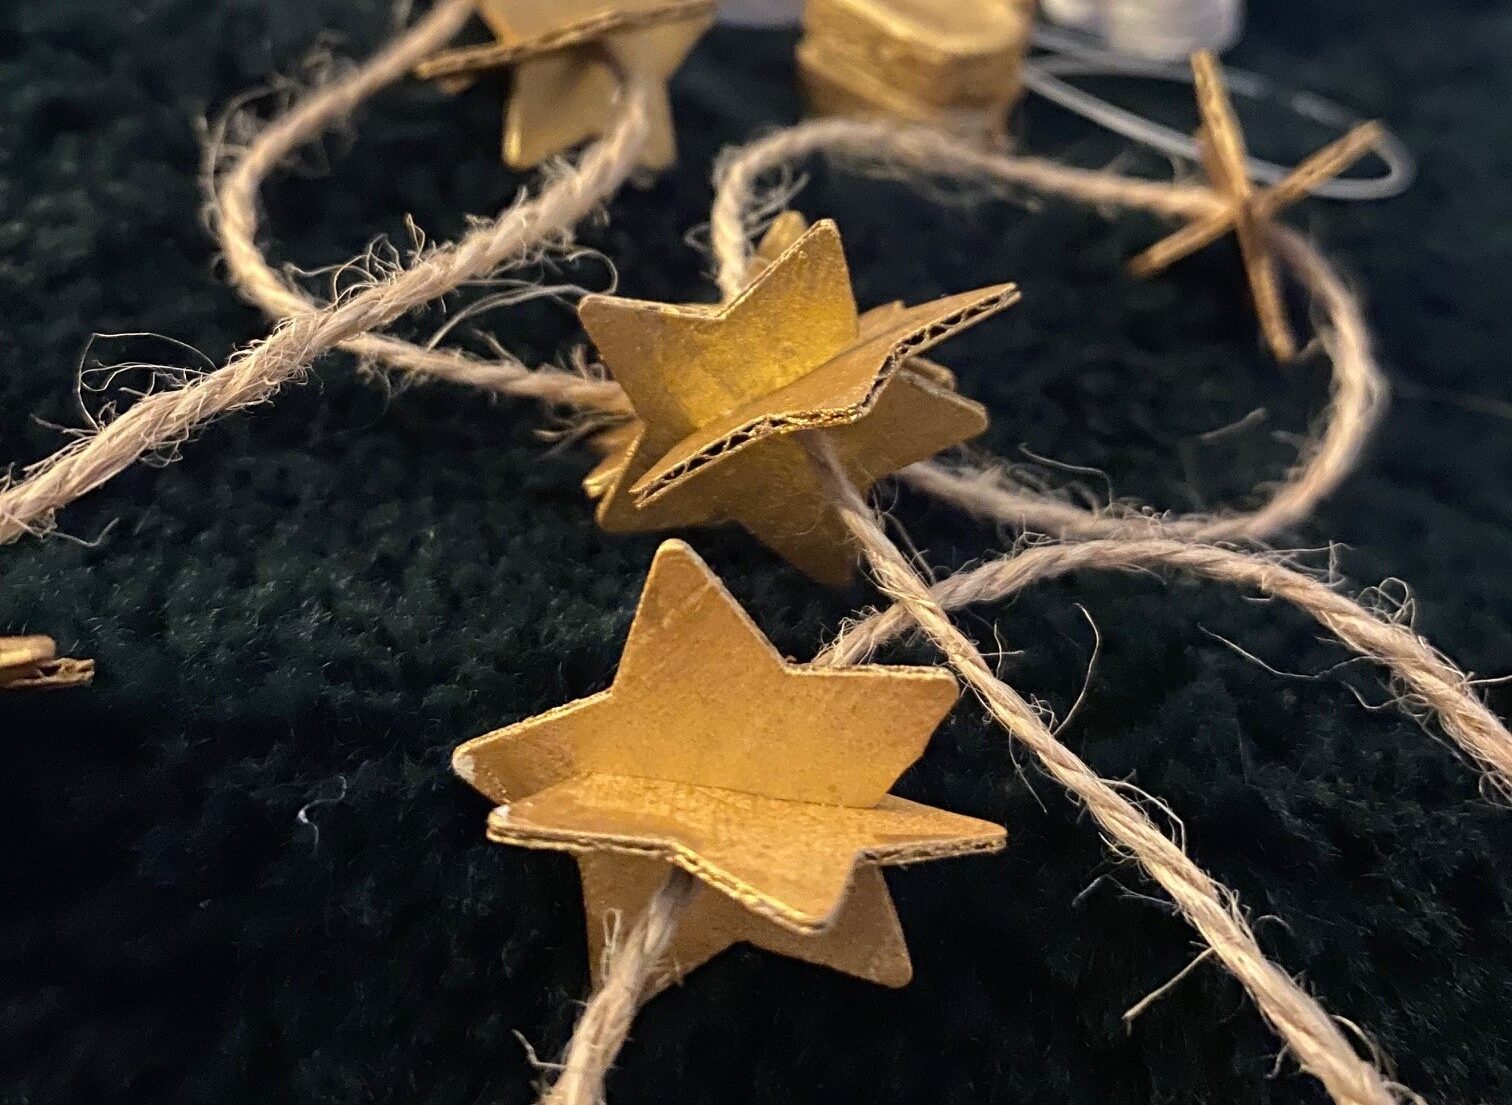 Using brown string gives your cardboard star garland a more rustic aesthetic, but jewellery wire can be used if you prefer a cleaner look.